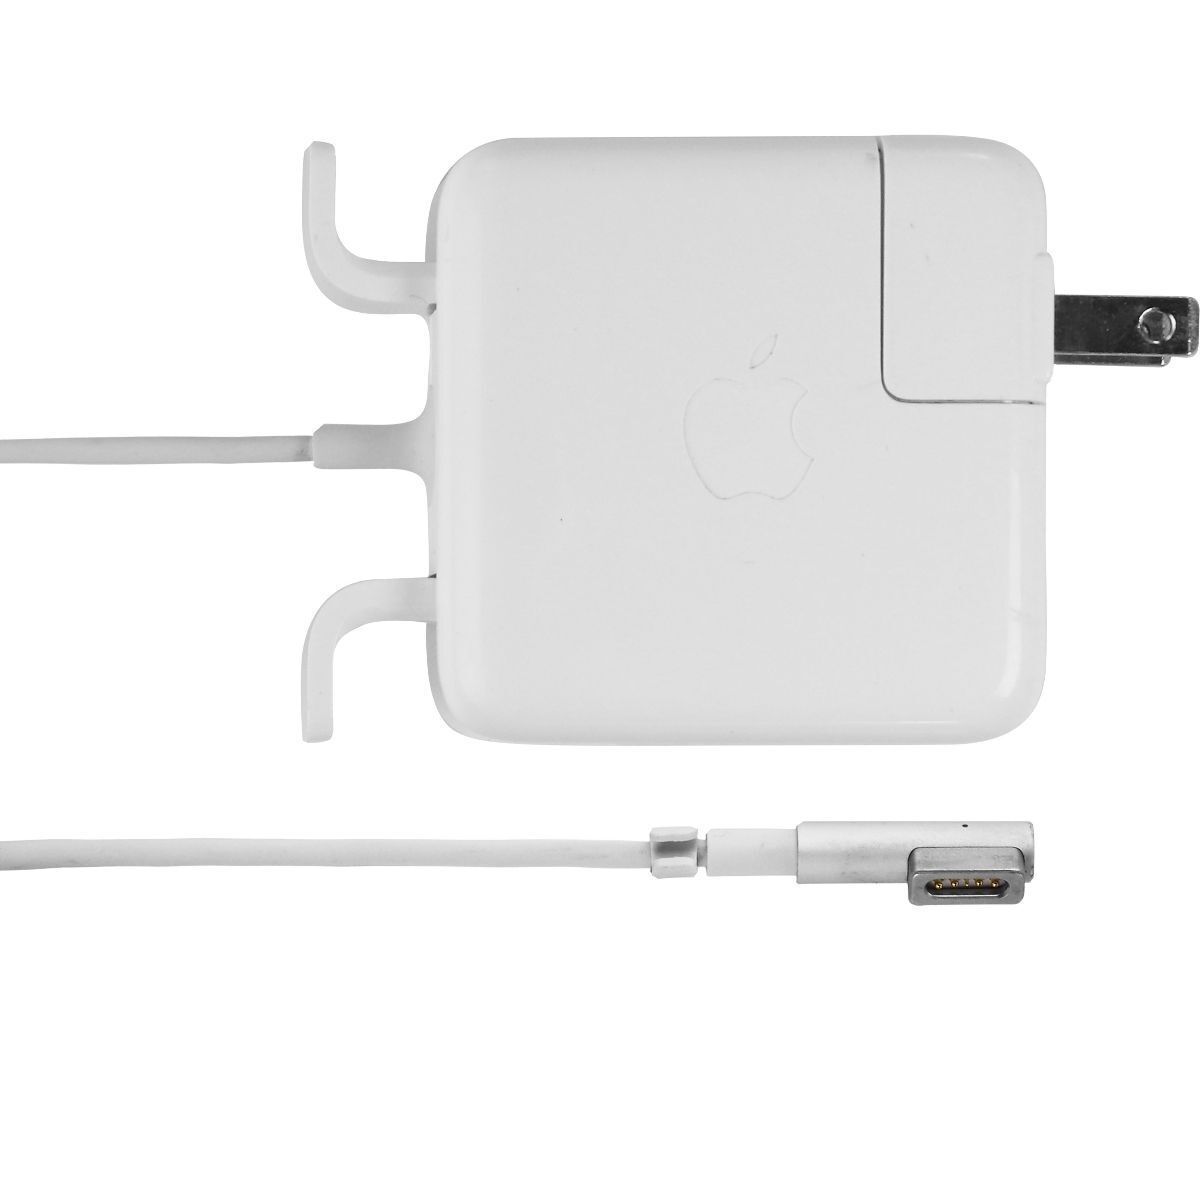 Apple OEM Original (A1374) 45W MagSafe Power Adapter with Fold Plug Only - White